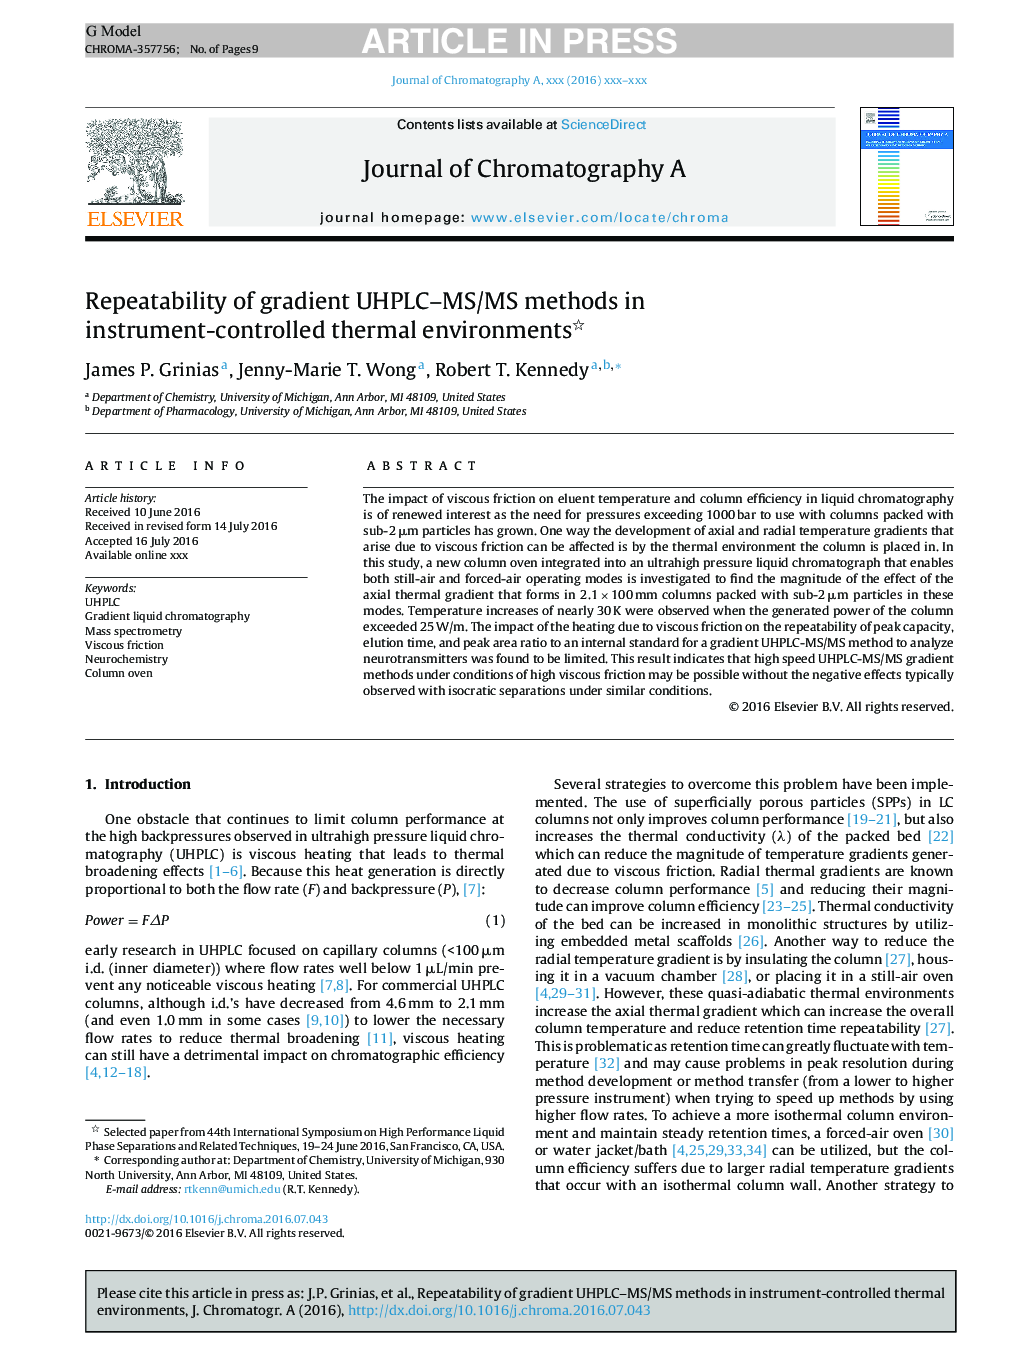 Repeatability of gradient ultrahigh pressure liquid chromatography-tandem mass spectrometry methods in instrument-controlled thermal environments